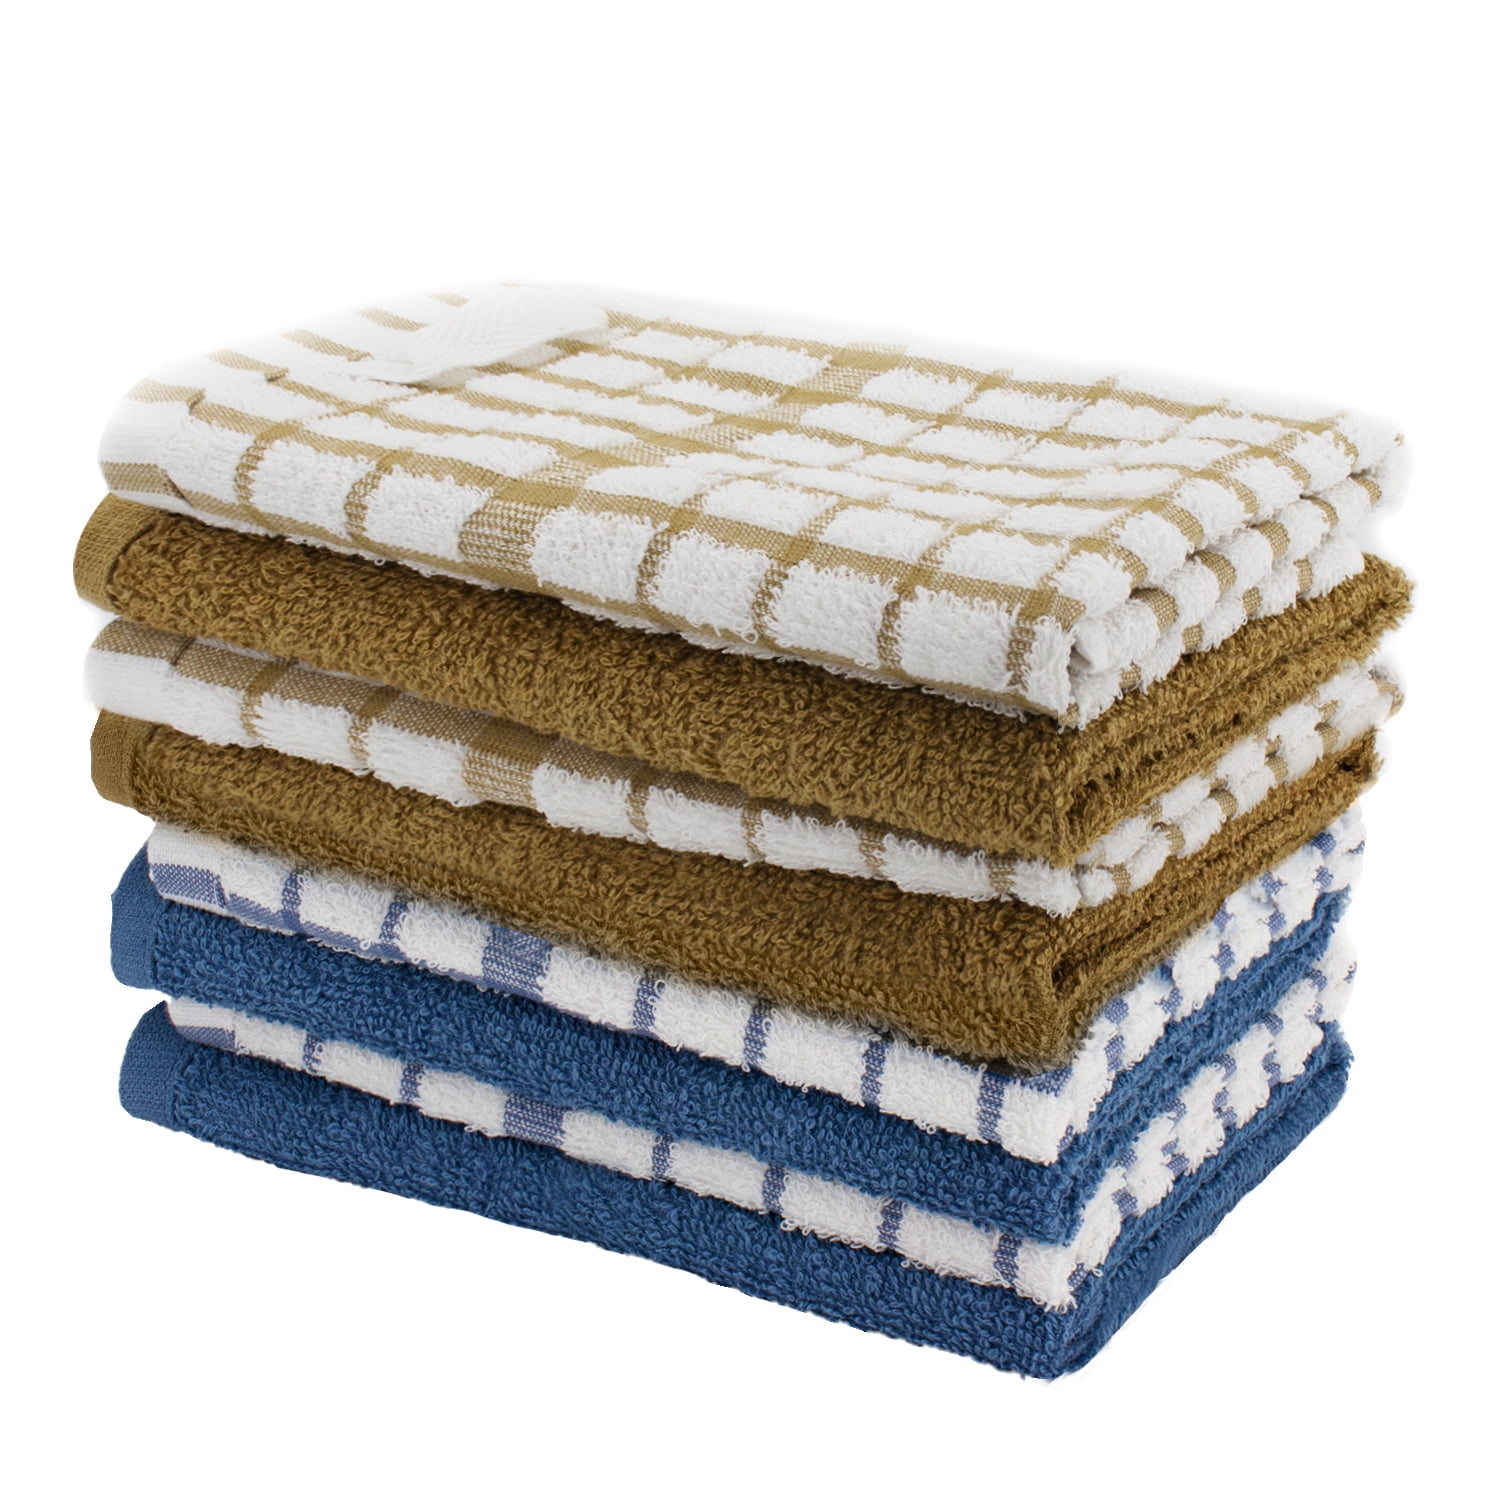 PY Home & Sports Dish Towels Set, 100% Cotton Kitchen Towels 8 Pieces, Super Absorbent Kitchen Hand Dish Cloths for Drying An